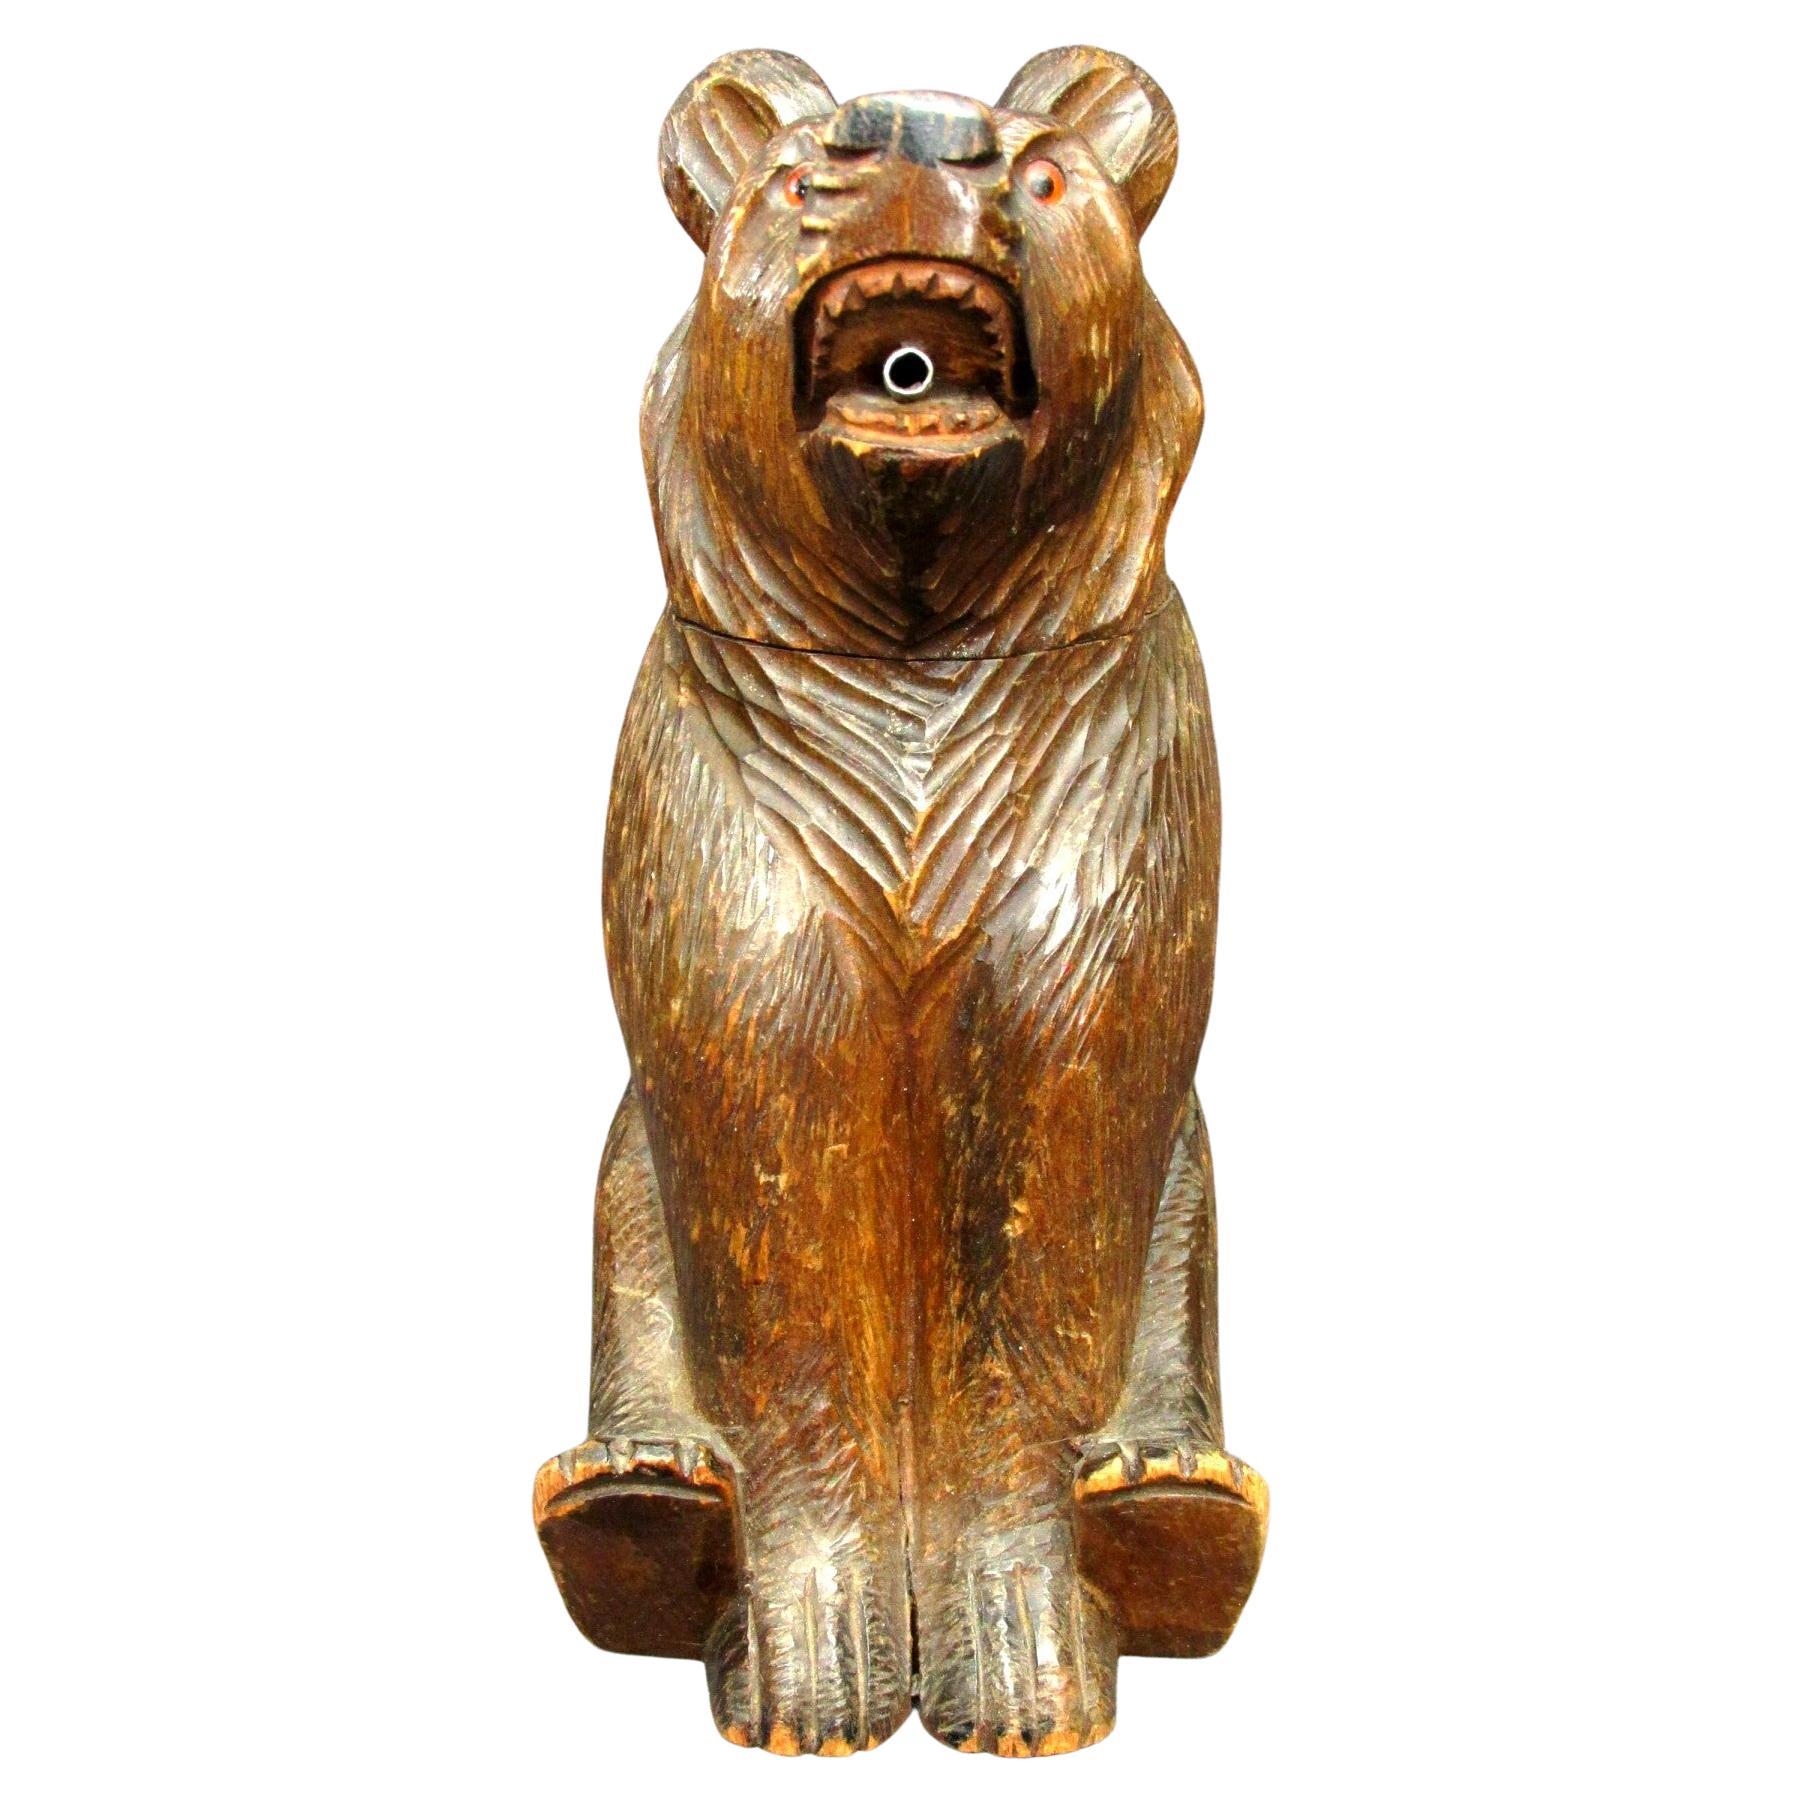 A rare & amusing hand carved Lindenwood figure of a seated bear encasing its original glass liner, fitted with a removable head with amber colored glass eyes, the mouth fitted with a pour spout.